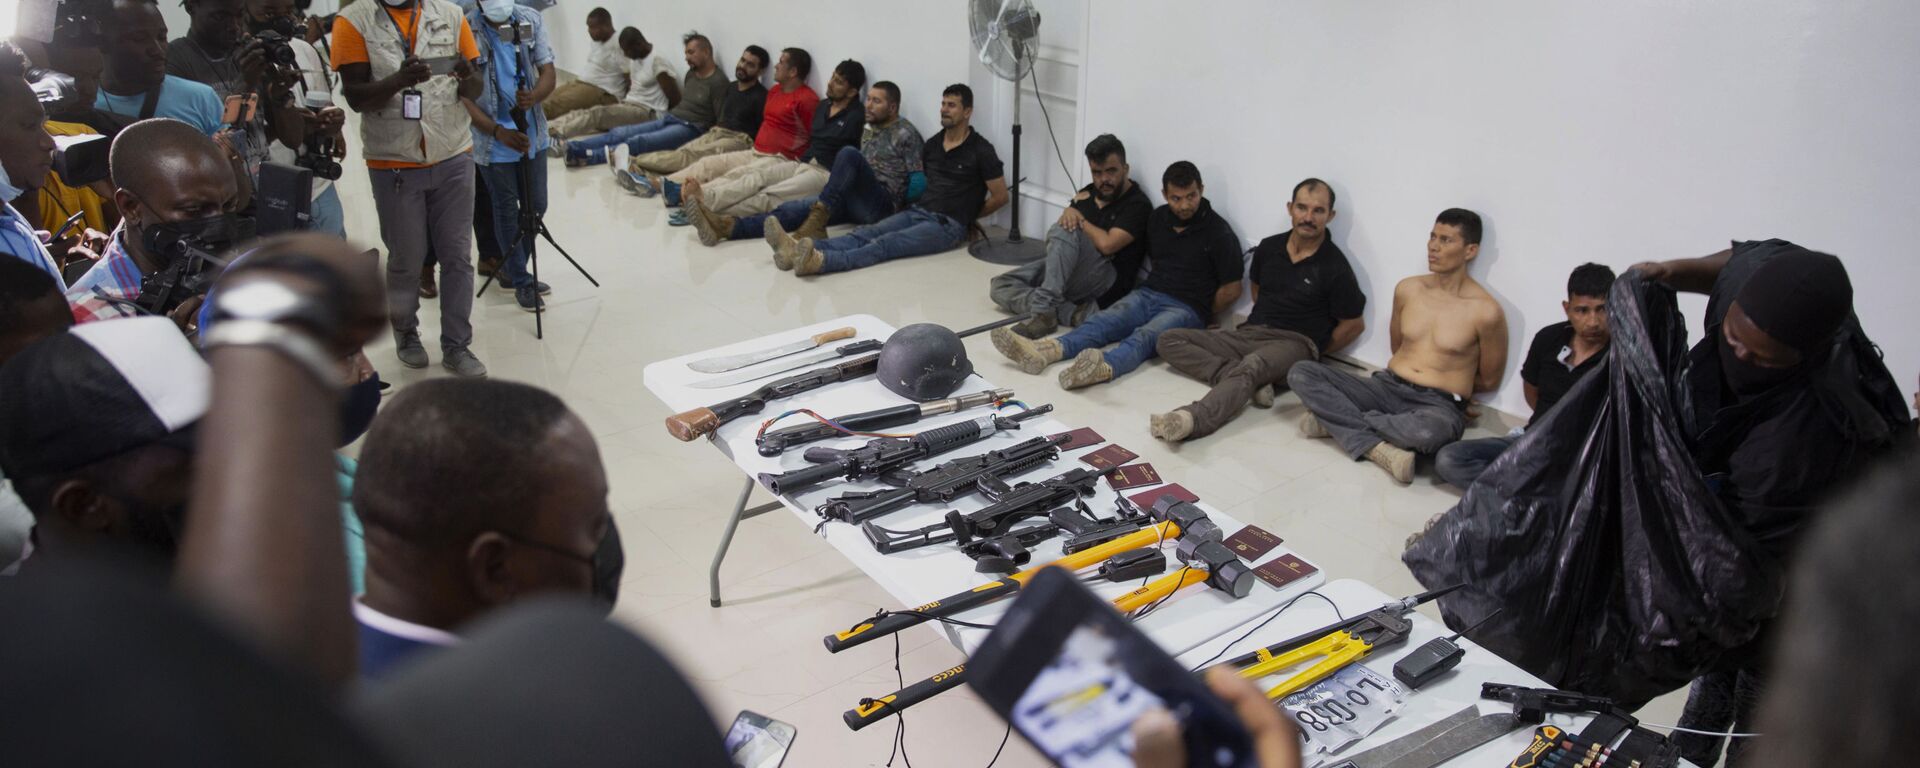 Suspects in the assassination of Haiti's President Jovenel Moise are shown to the media, along with the weapons and equipment they allegedly used in the attack, at the General Direction of the police in Port-au-Prince, Haiti, Thursday, July 8, 2021. - Sputnik International, 1920, 10.07.2021